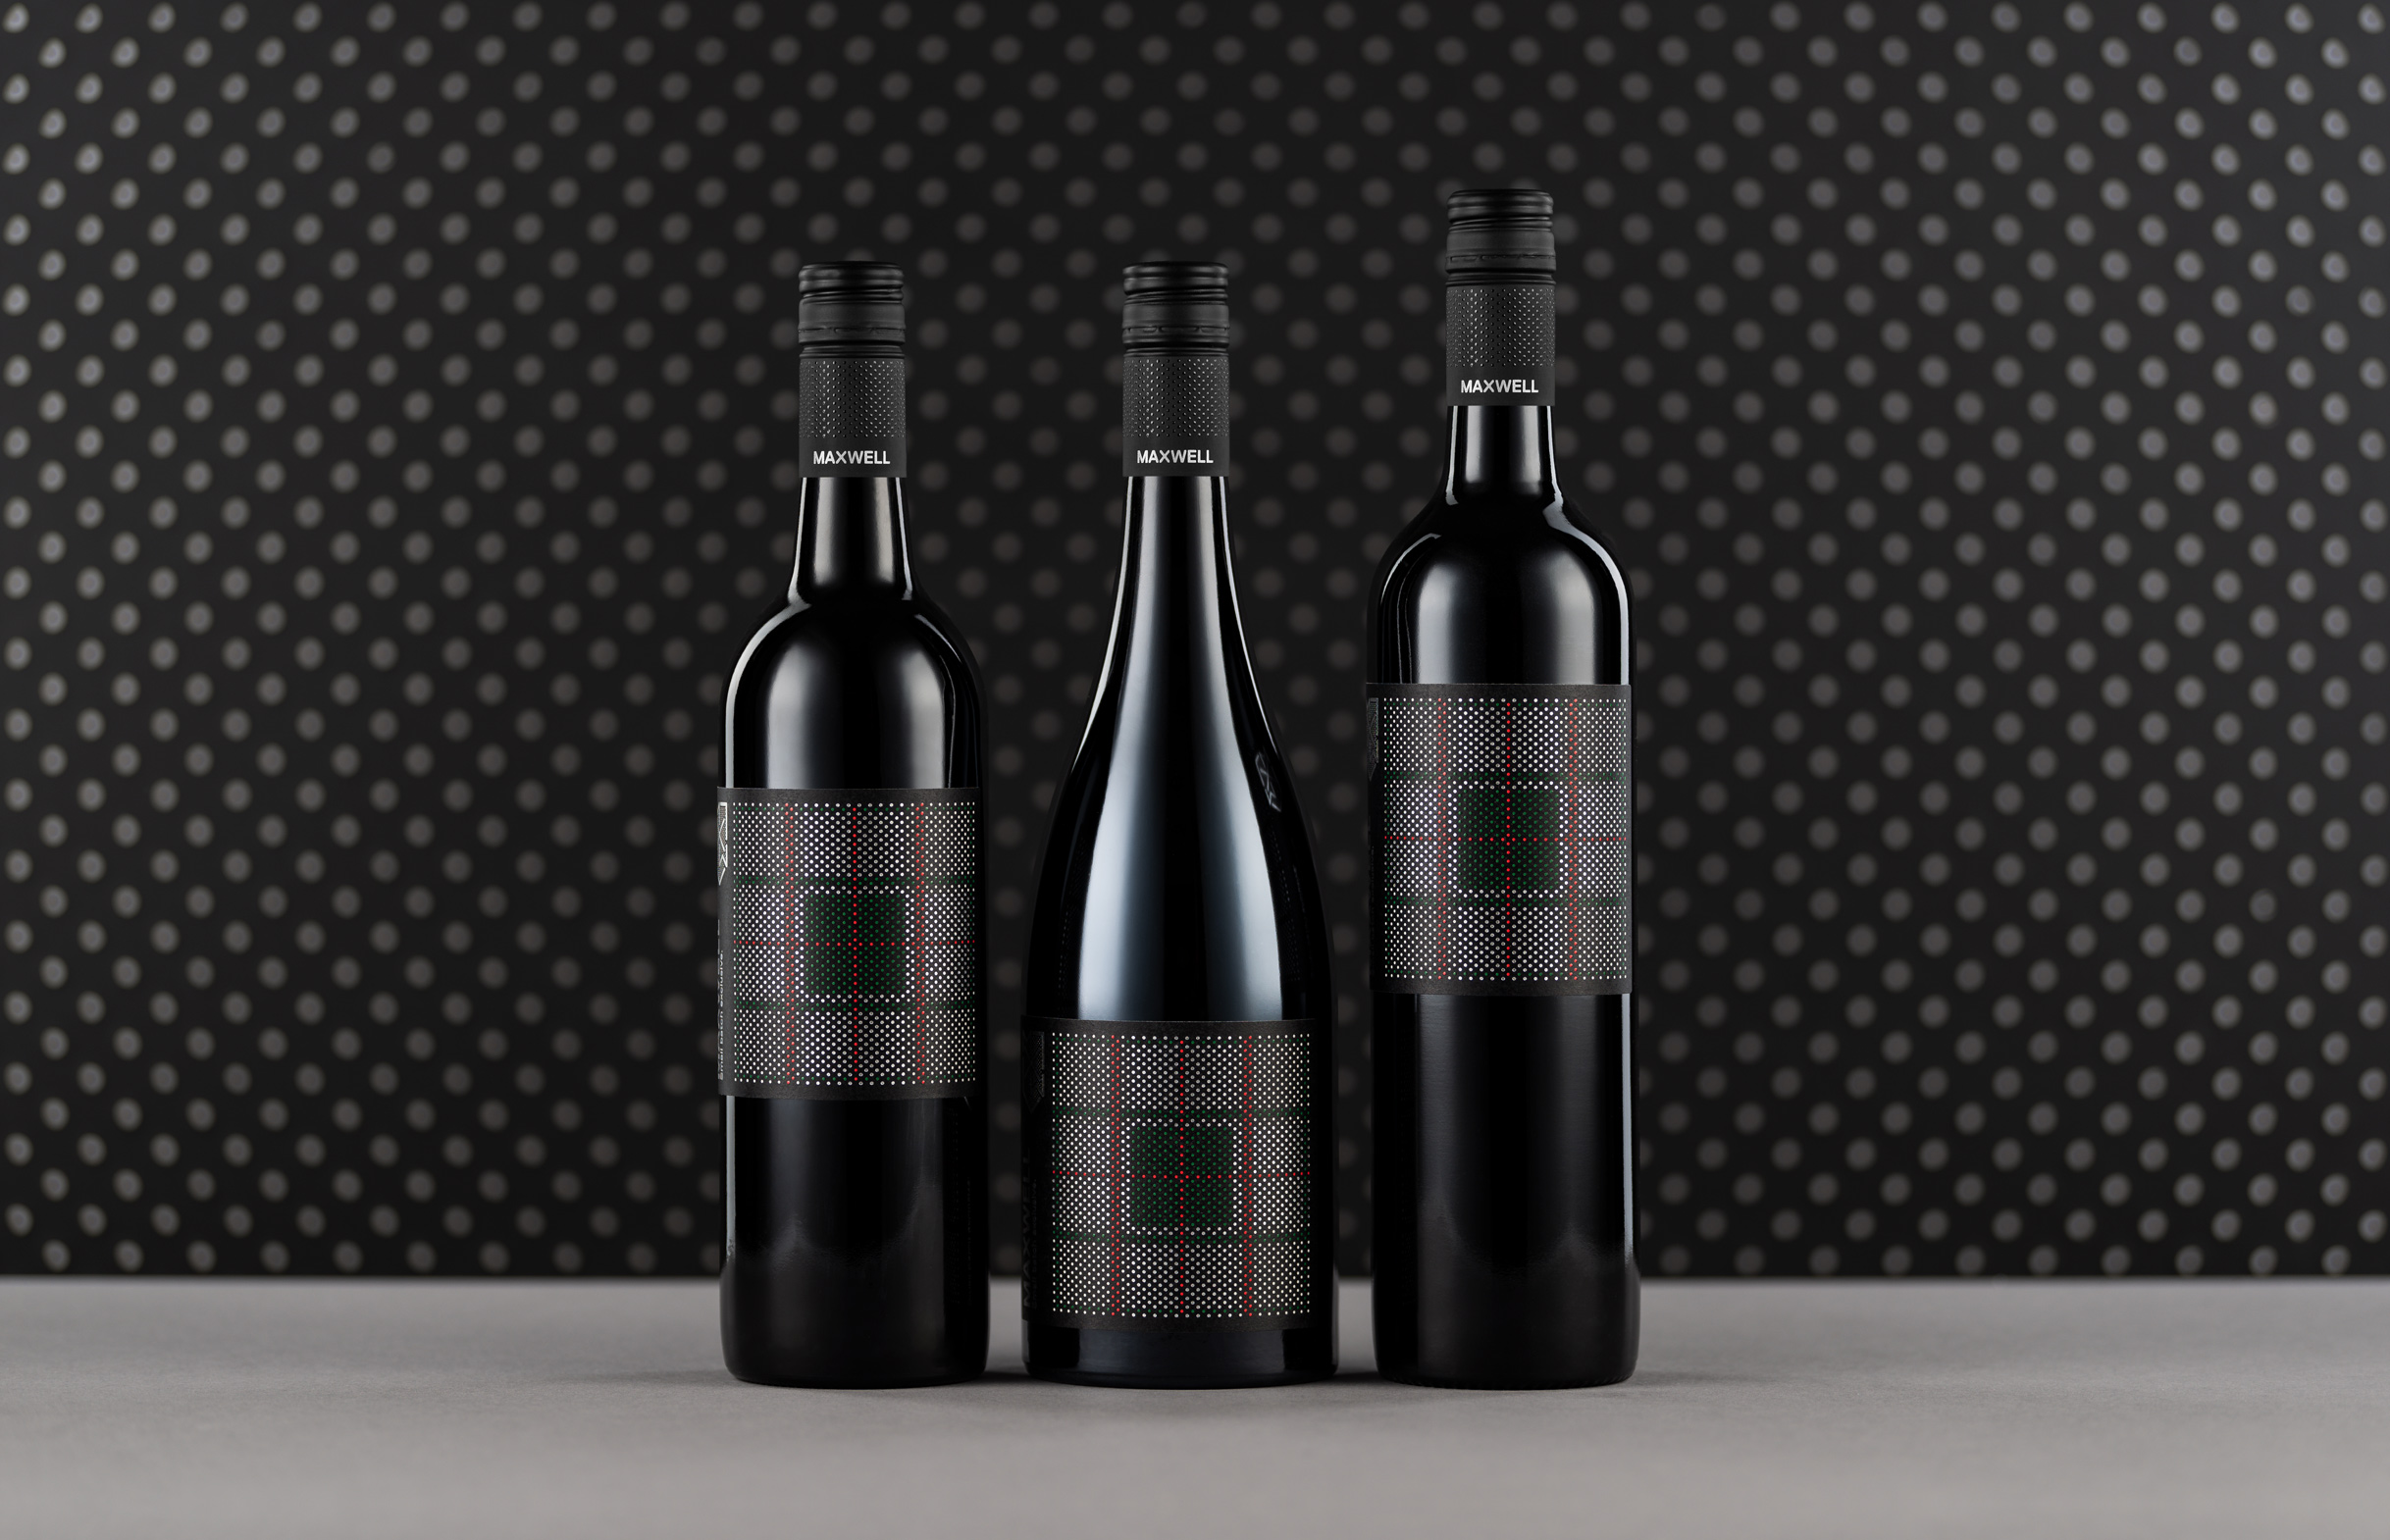 A Reinvention of a 40 Year Old Wine Brand